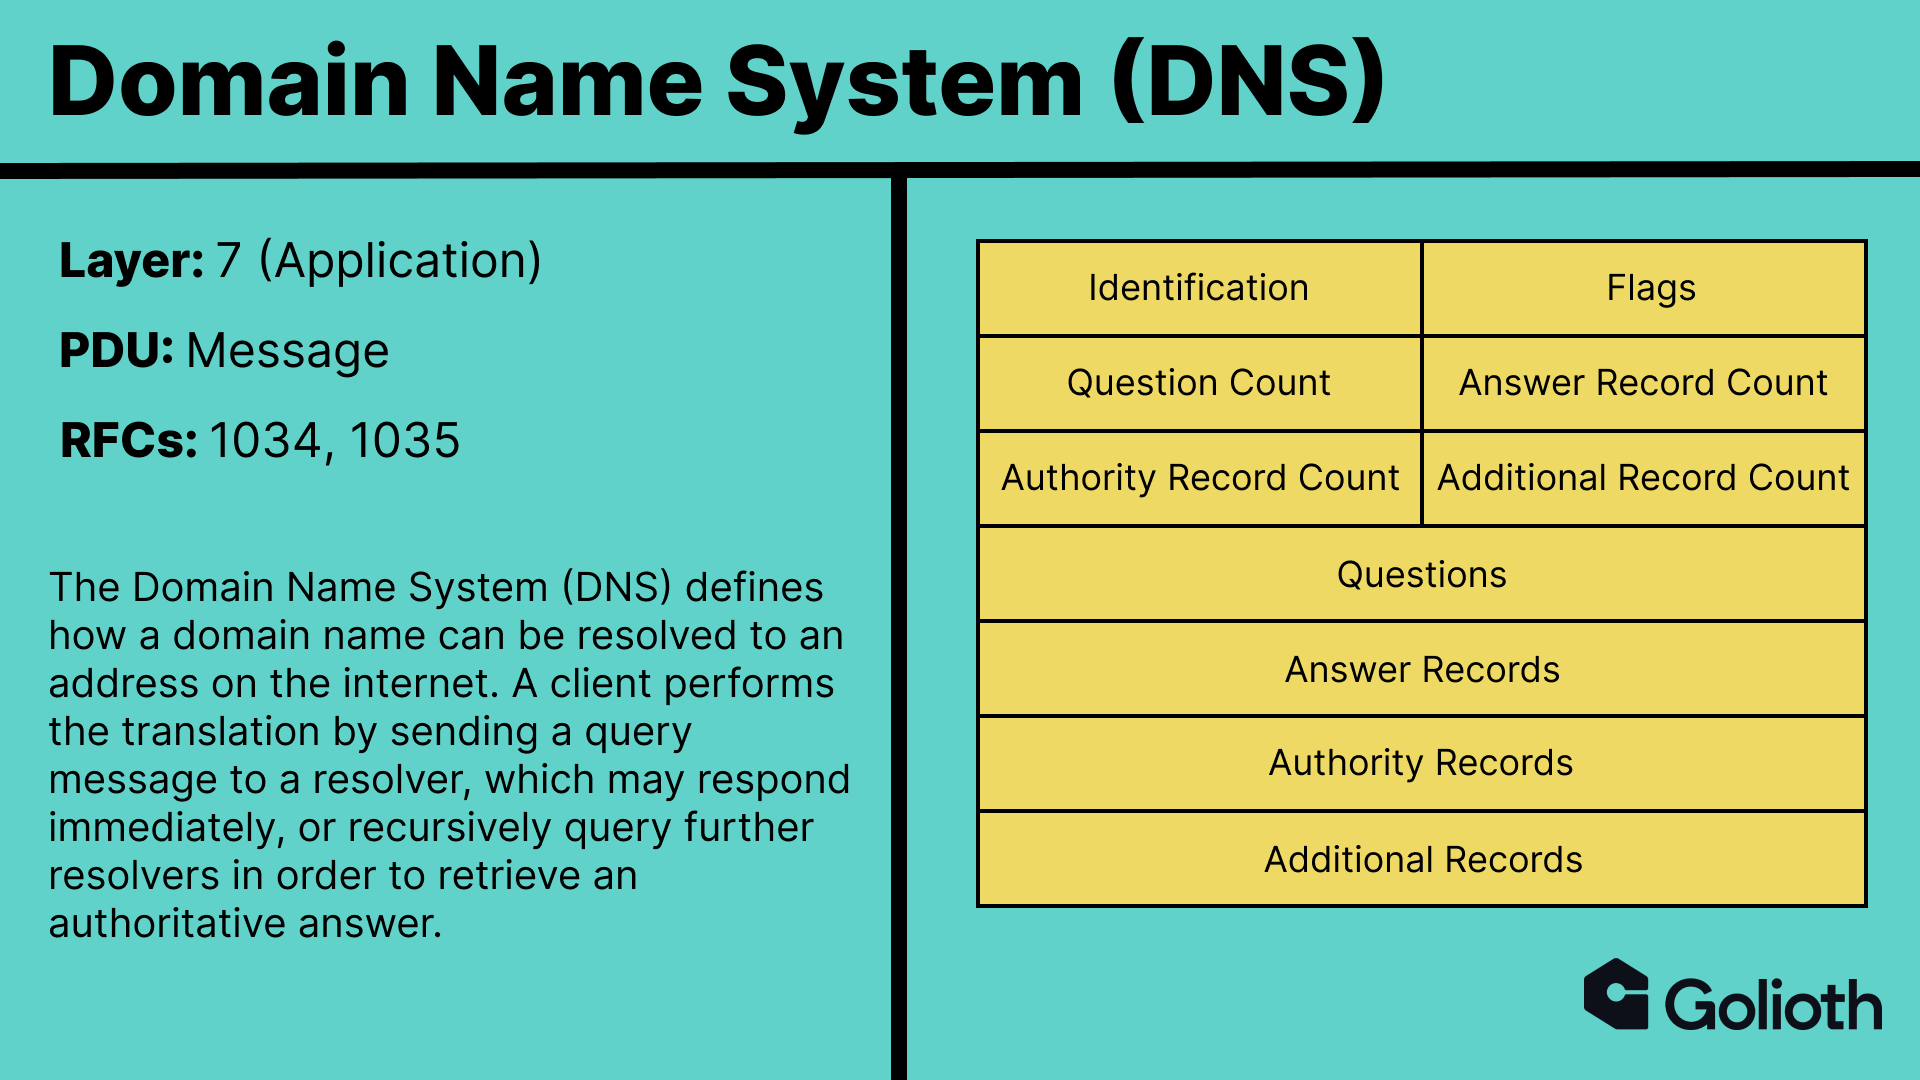 Description of the Domain Name System (DNS) protocol with PDU structure.